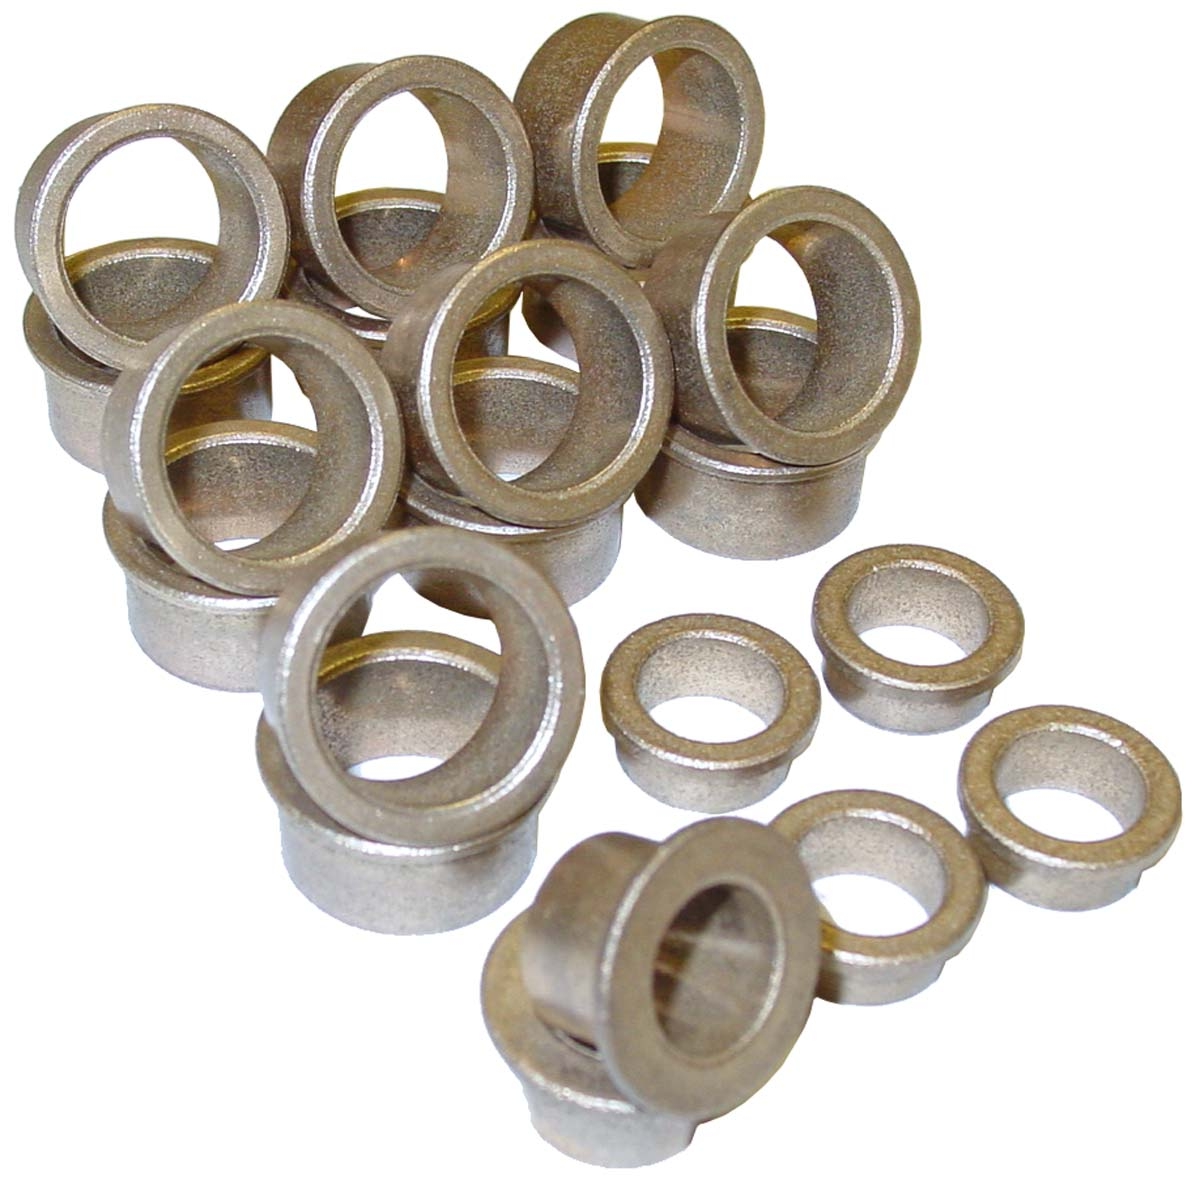 Details about   Seat Bushing Kit for FARMALL 1026 1066 1206 1256 1456 1468 1566 1568 4100 4156